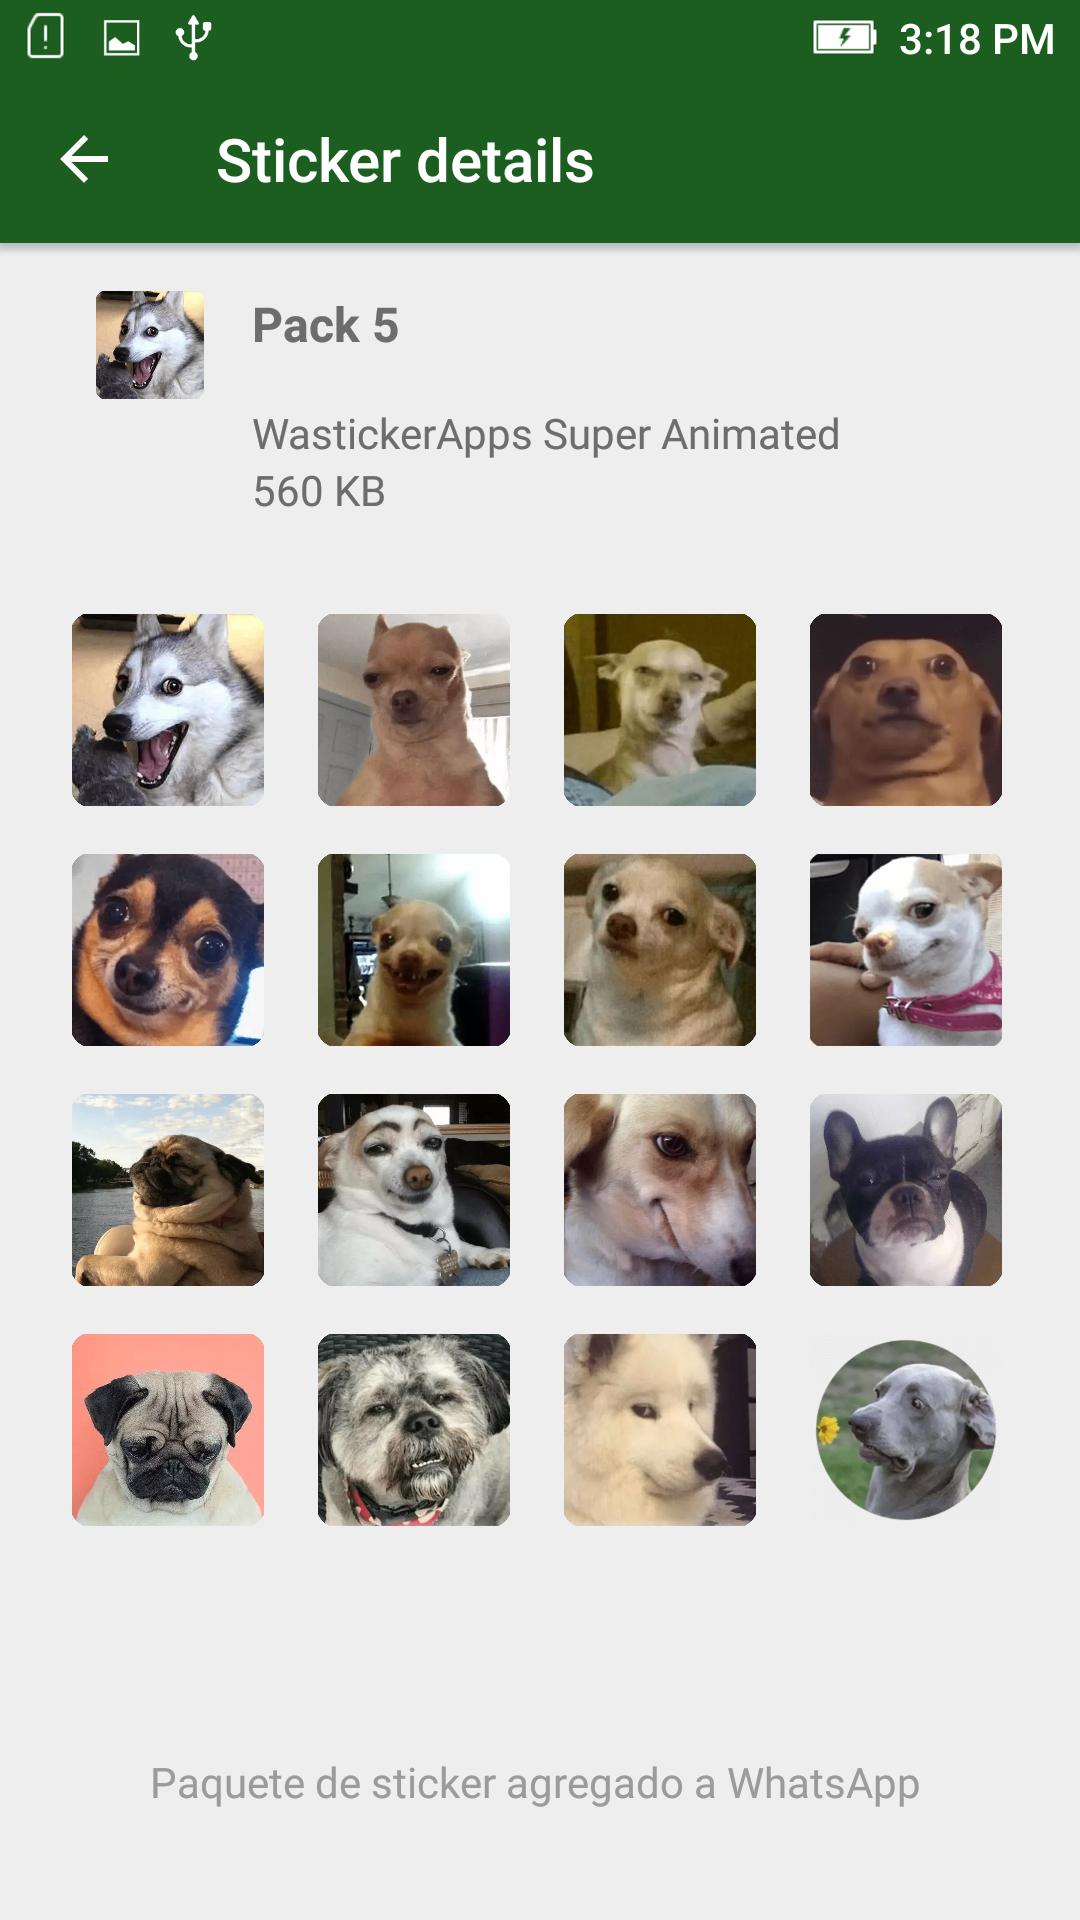 New Dog Memes Stickers Wastickerapps For Android Apk Download